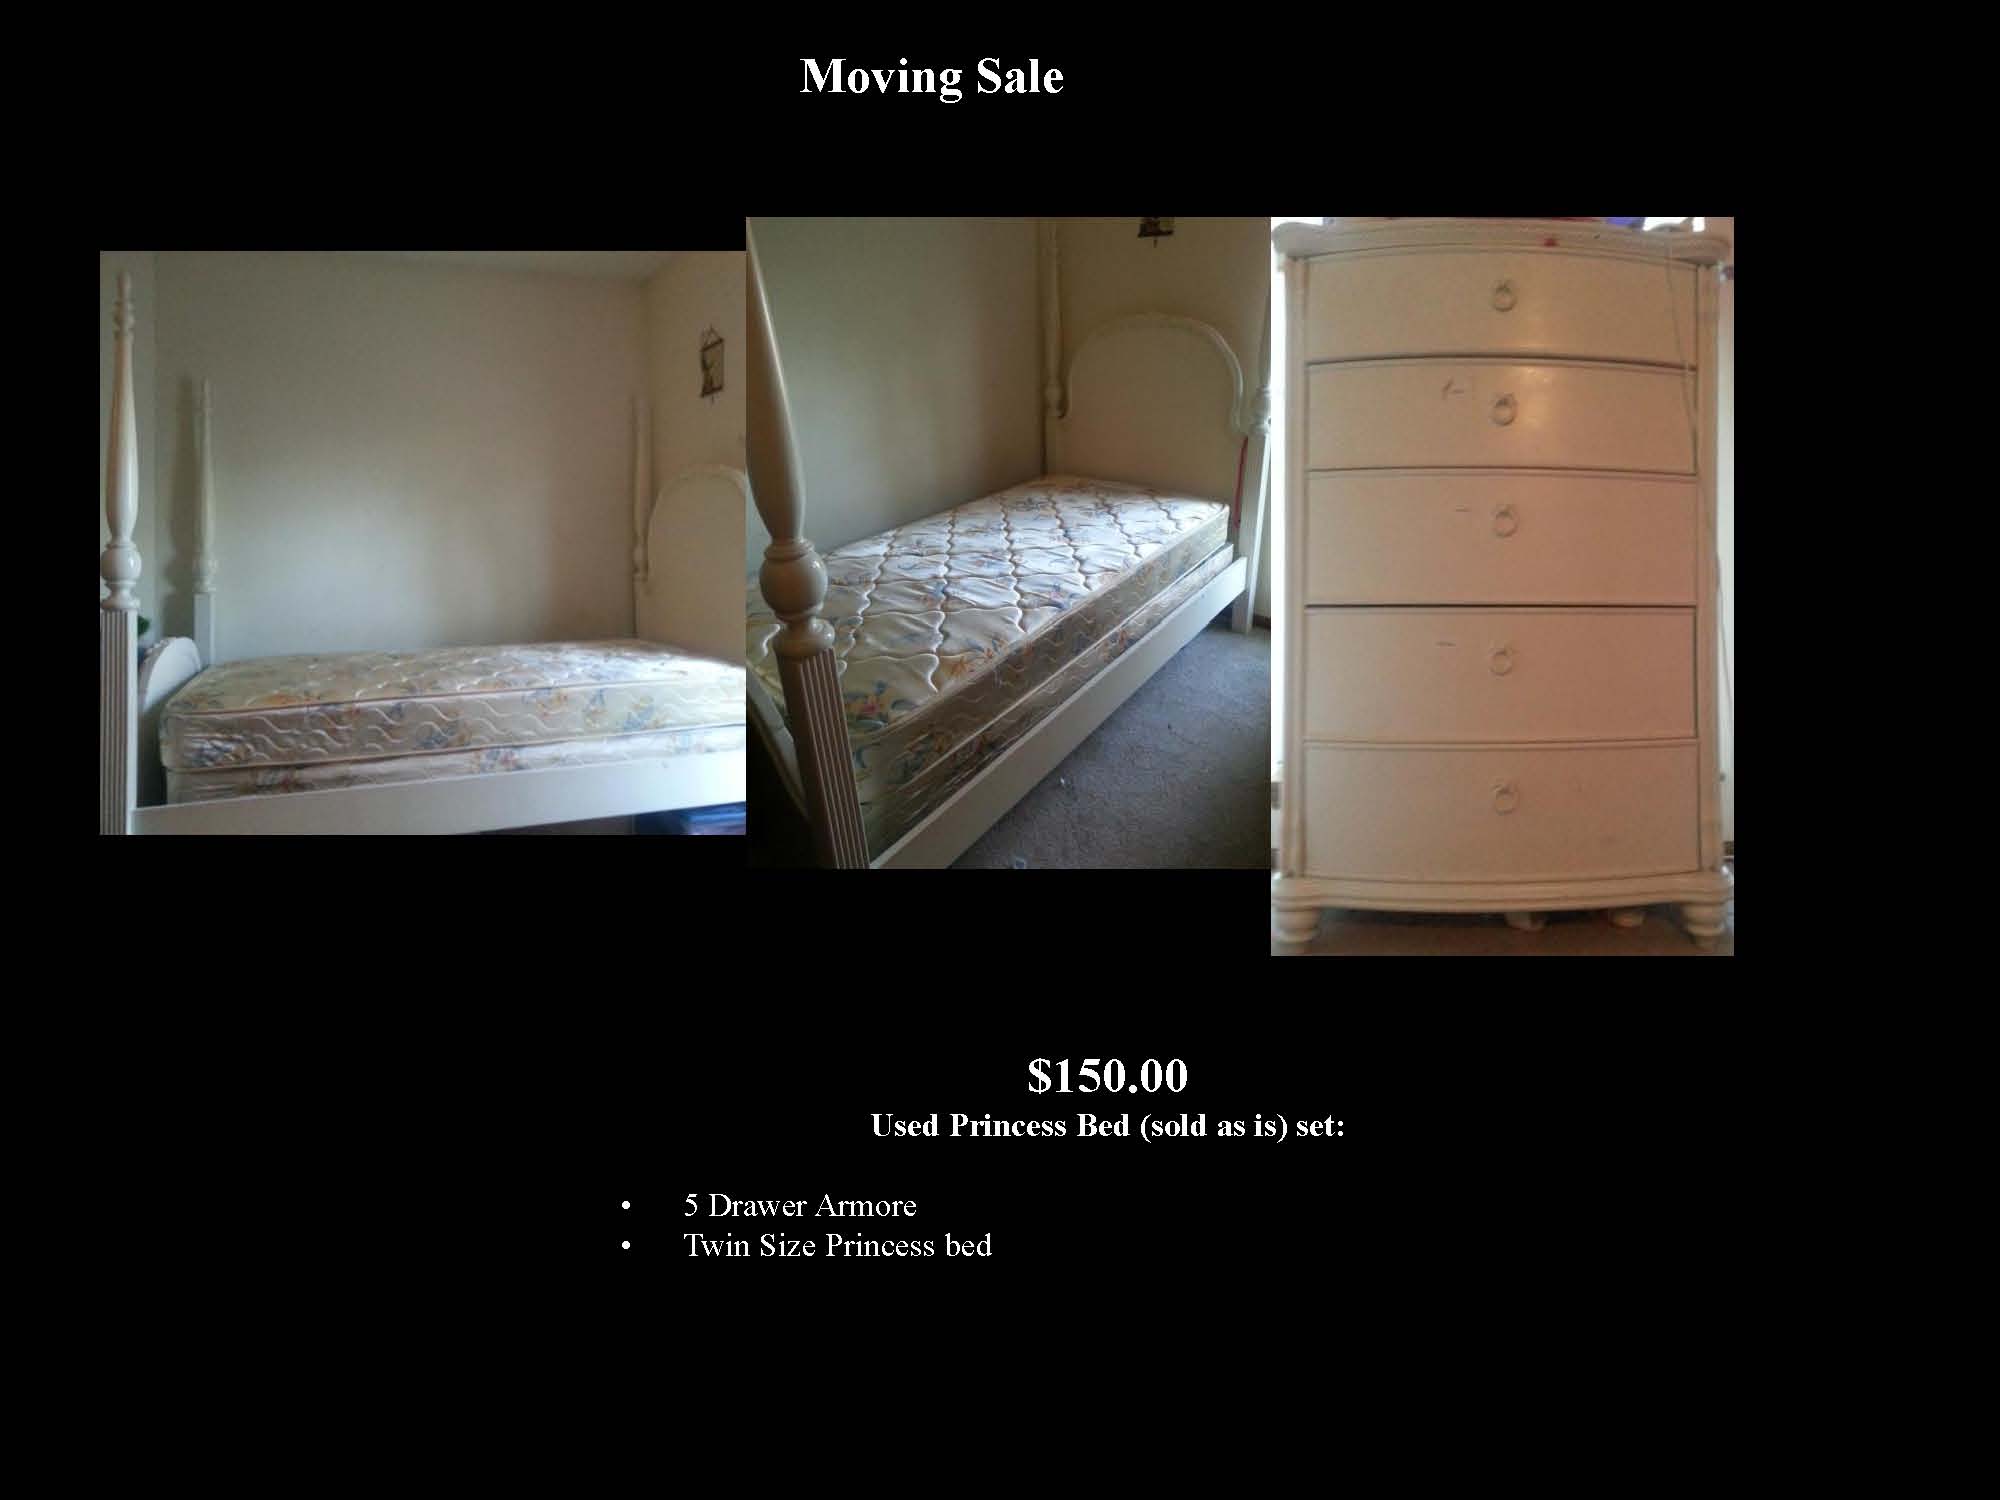 Used Princess Bed (sold as is) set: